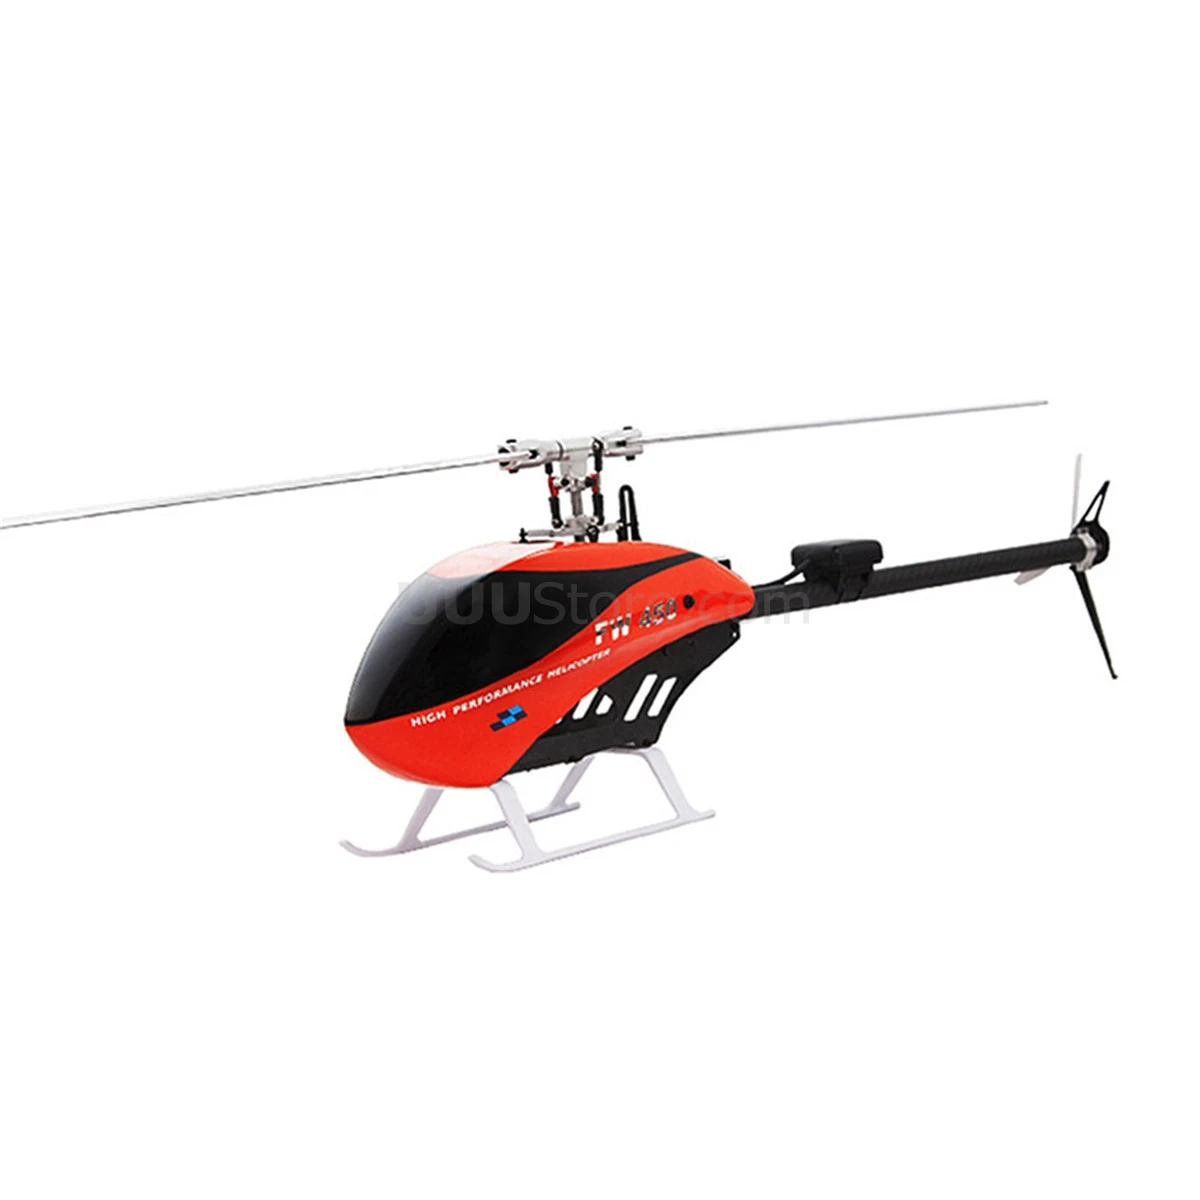 FLY WING Flywing FW450 3D RTF 6CH RC Smart Helicopter 2.4GHz Almost RTF Assembled RC Helicopter 2